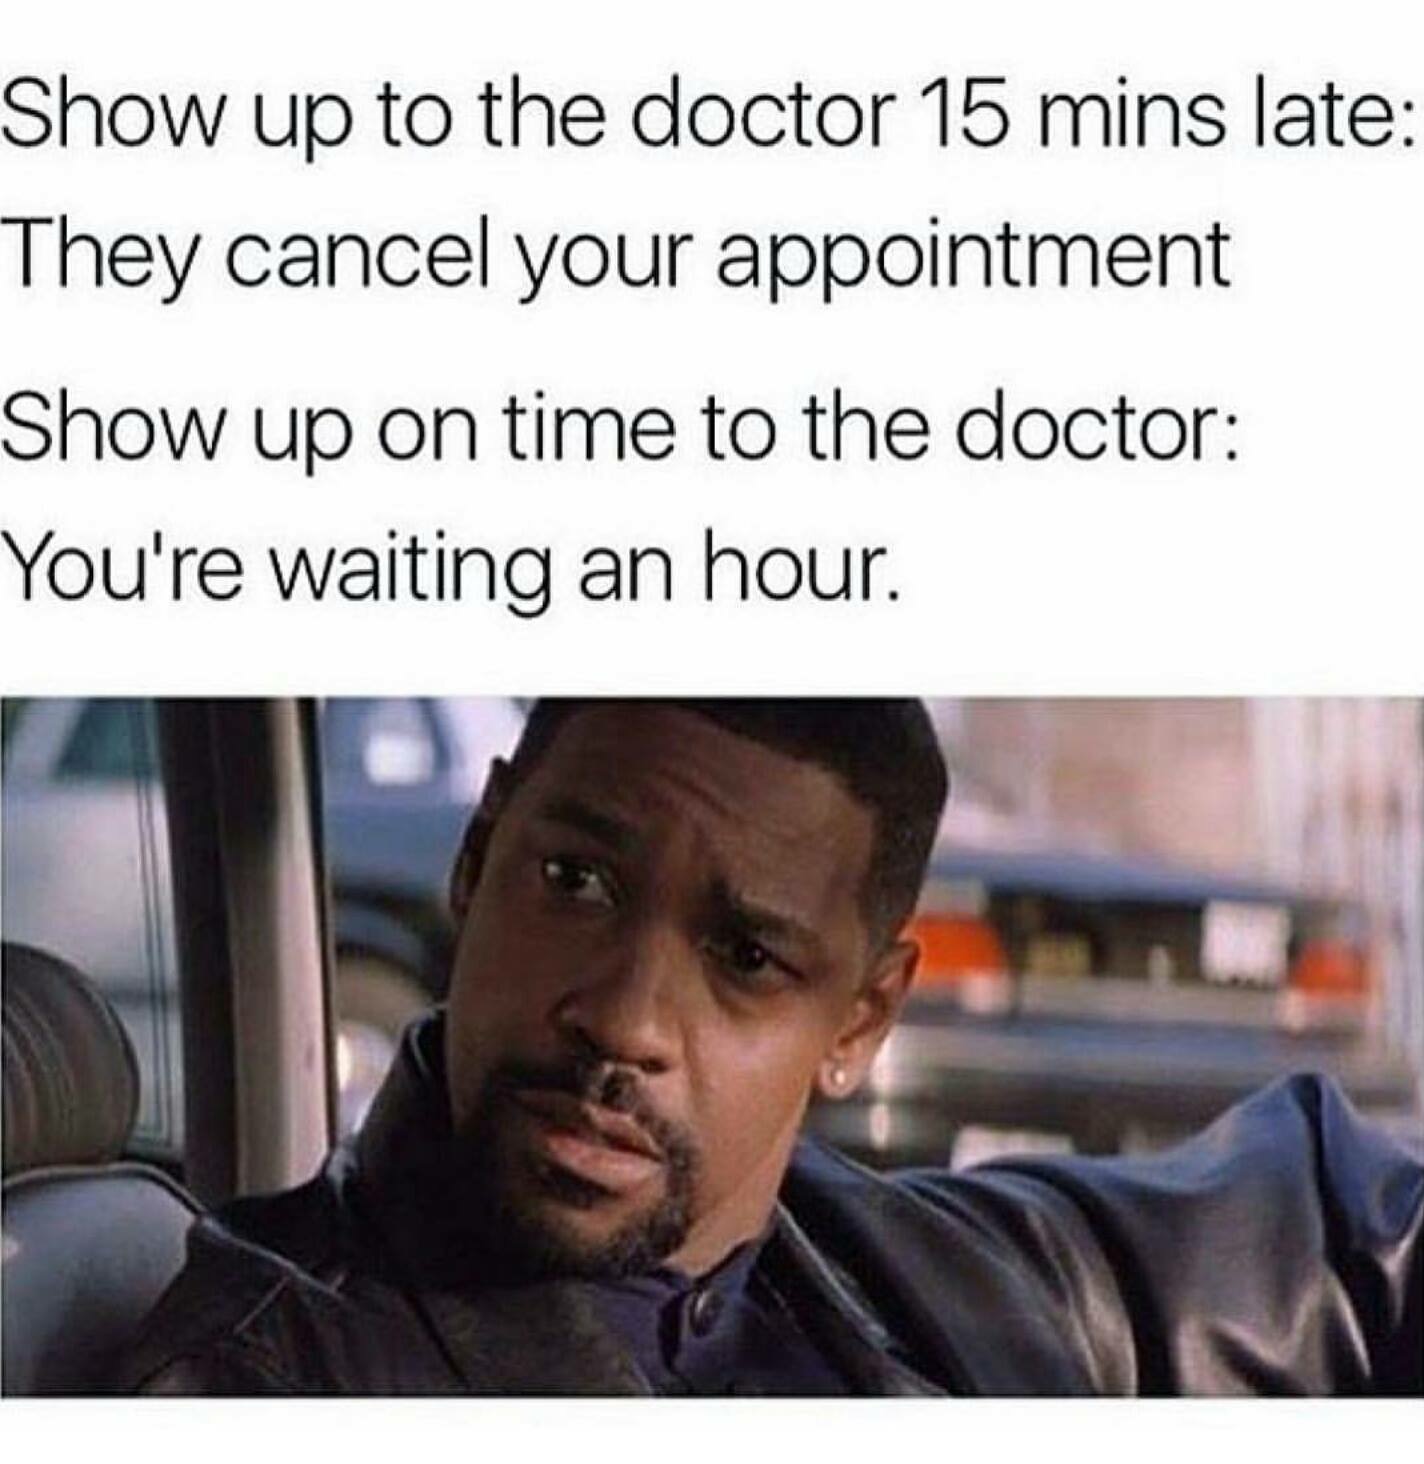 memes - doctor meme - Show up to the doctor 15 mins late They cancel your appointment Show up on time to the doctor You're waiting an hour.